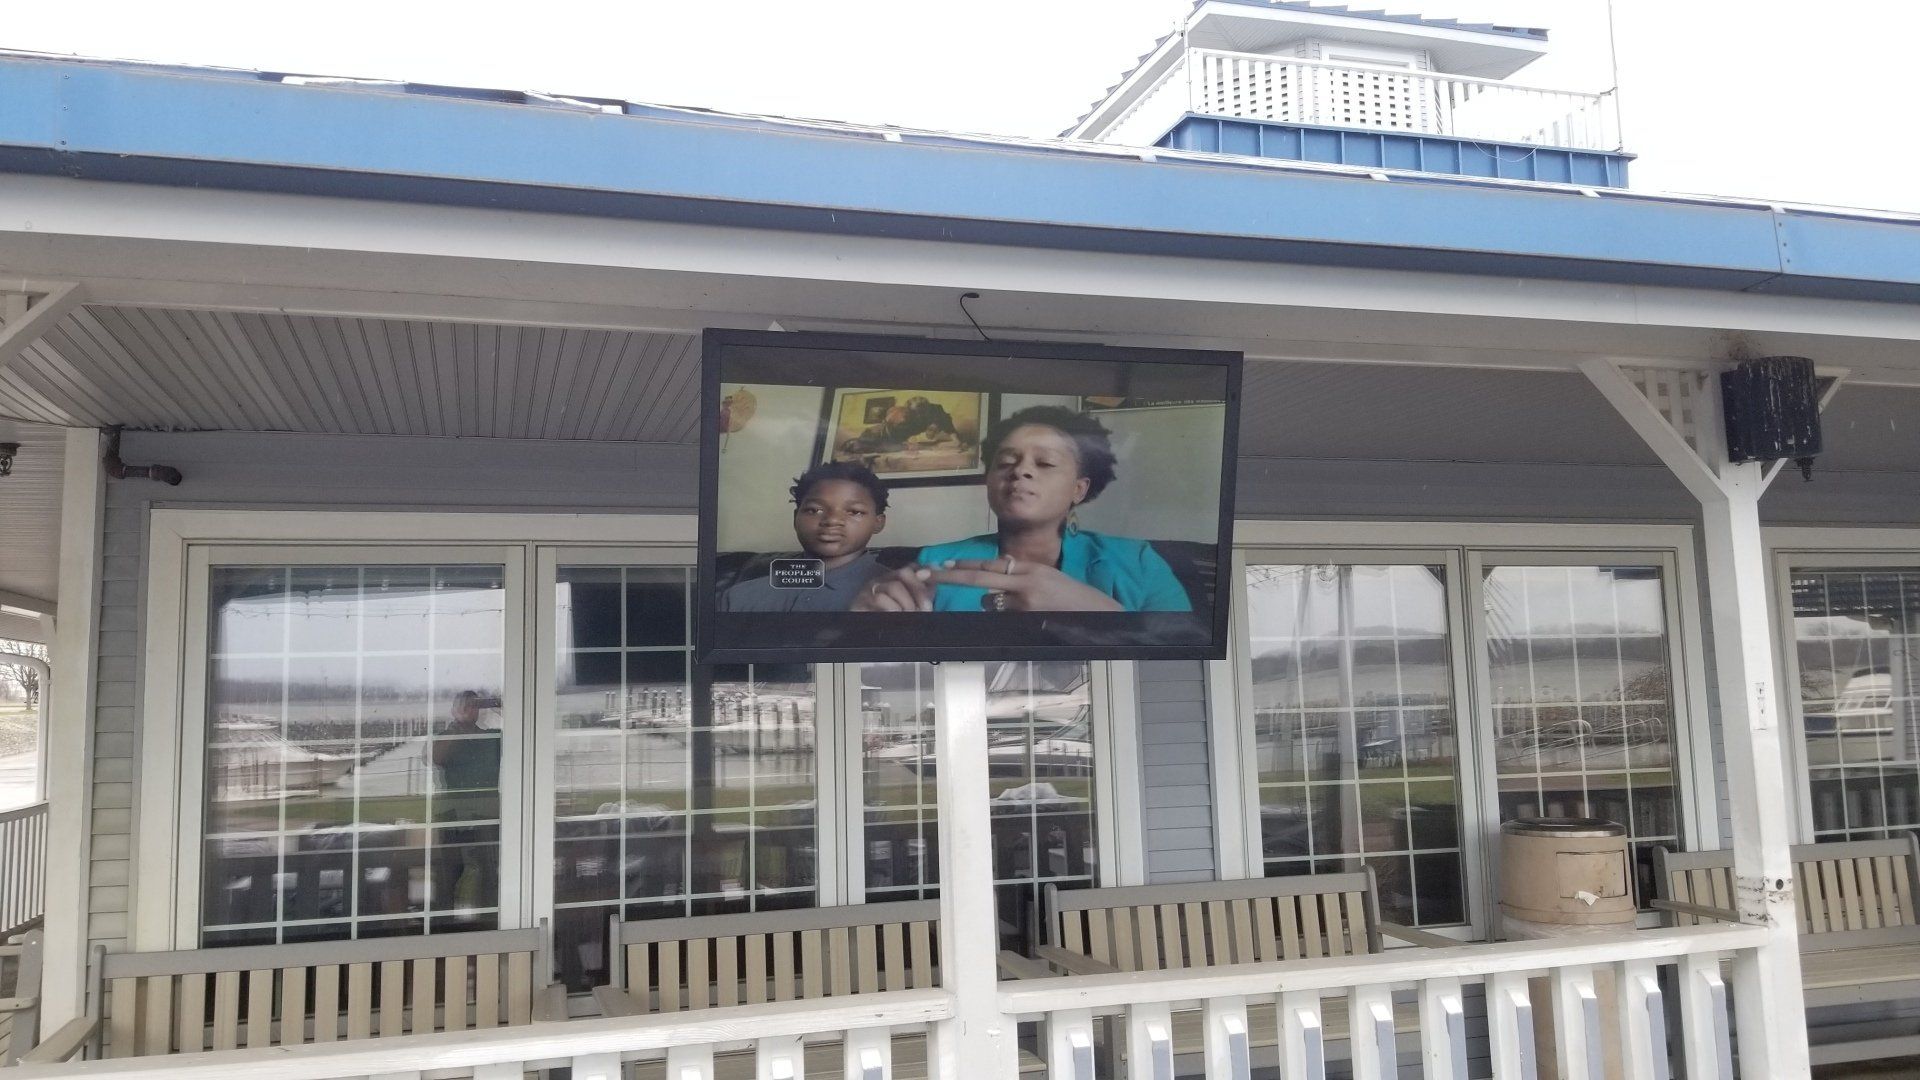 an outdoor television mounted on a porch shows a woman talking to a child